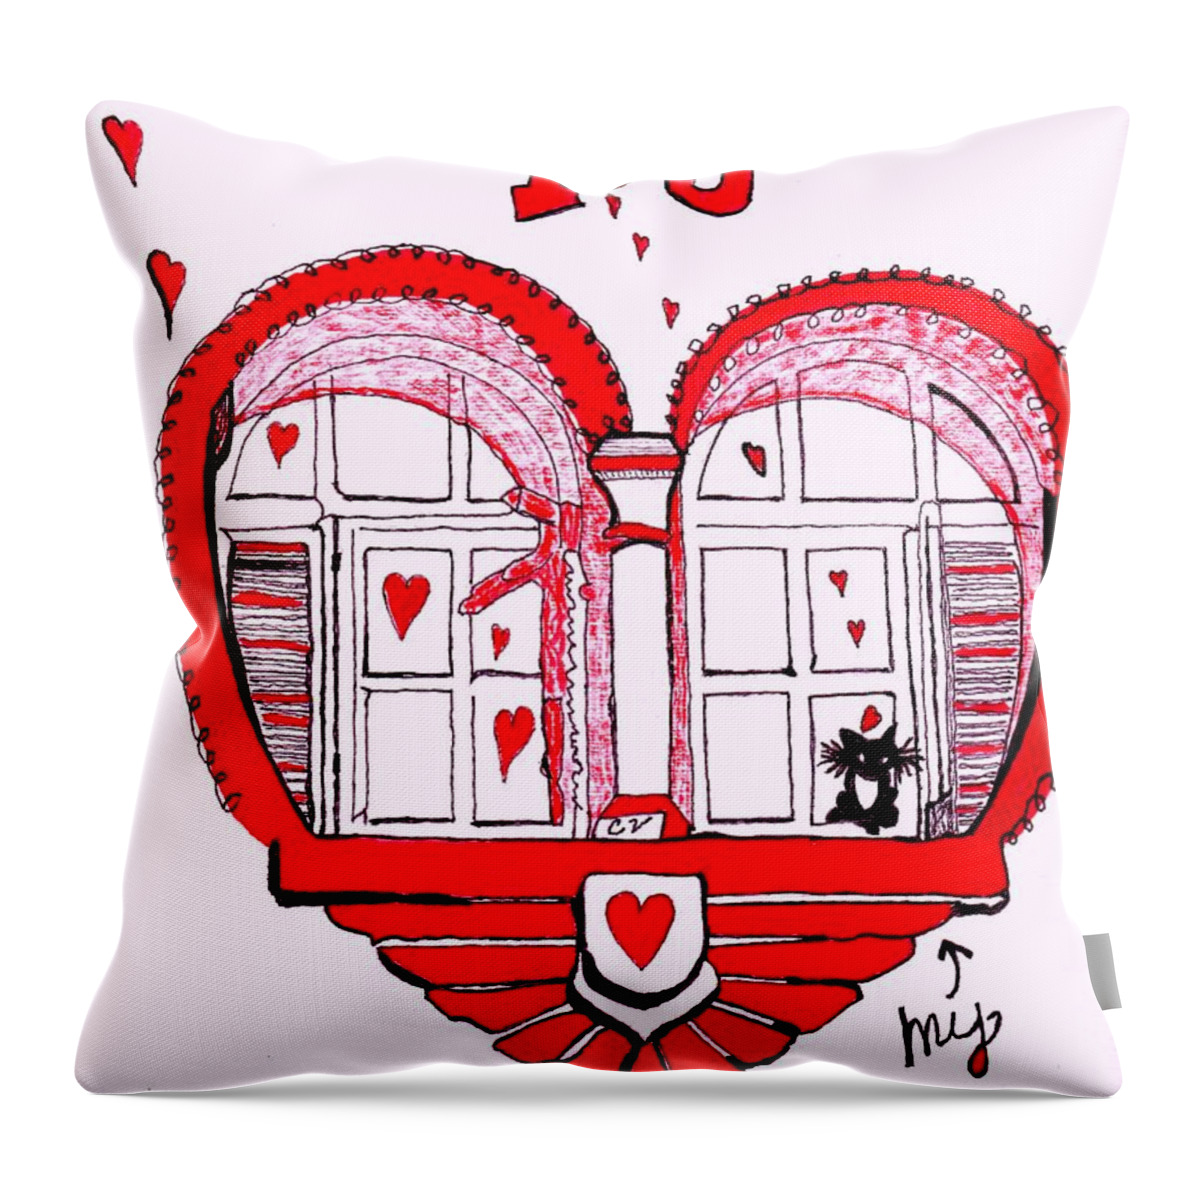 Valantine Card Throw Pillow featuring the painting I Love You by Connie Valasco